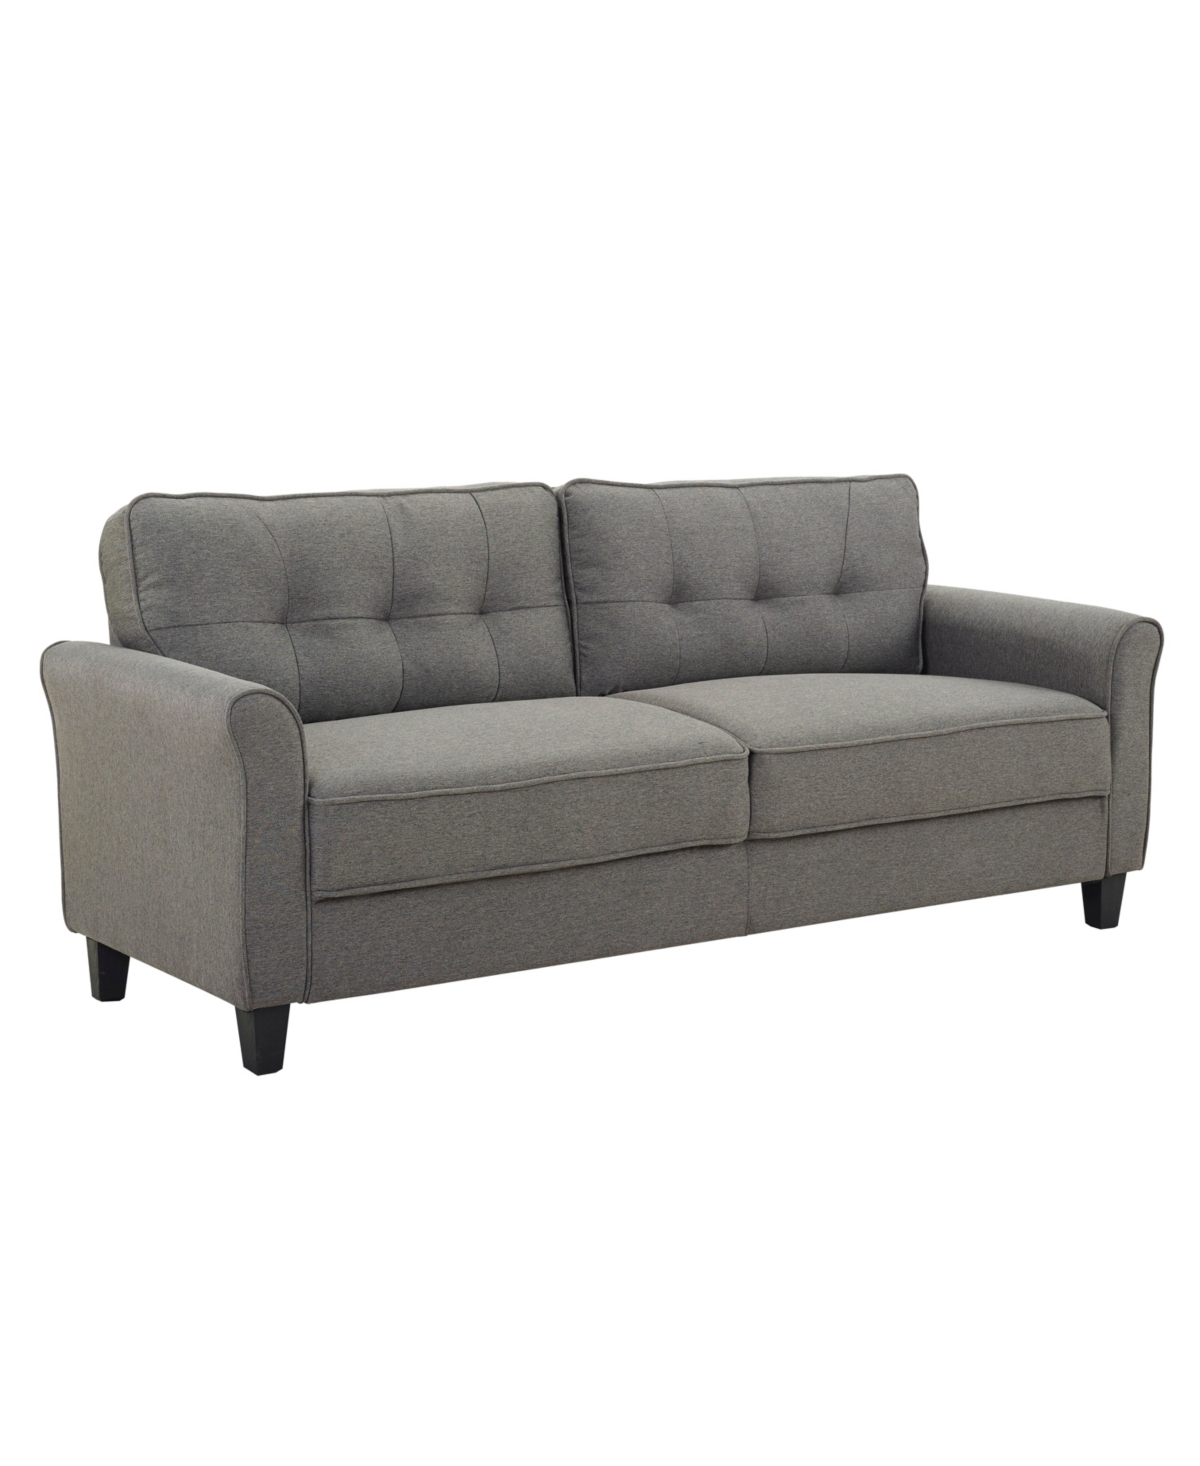 Lifestyle Solutions Hali Sofa In Heather Gray